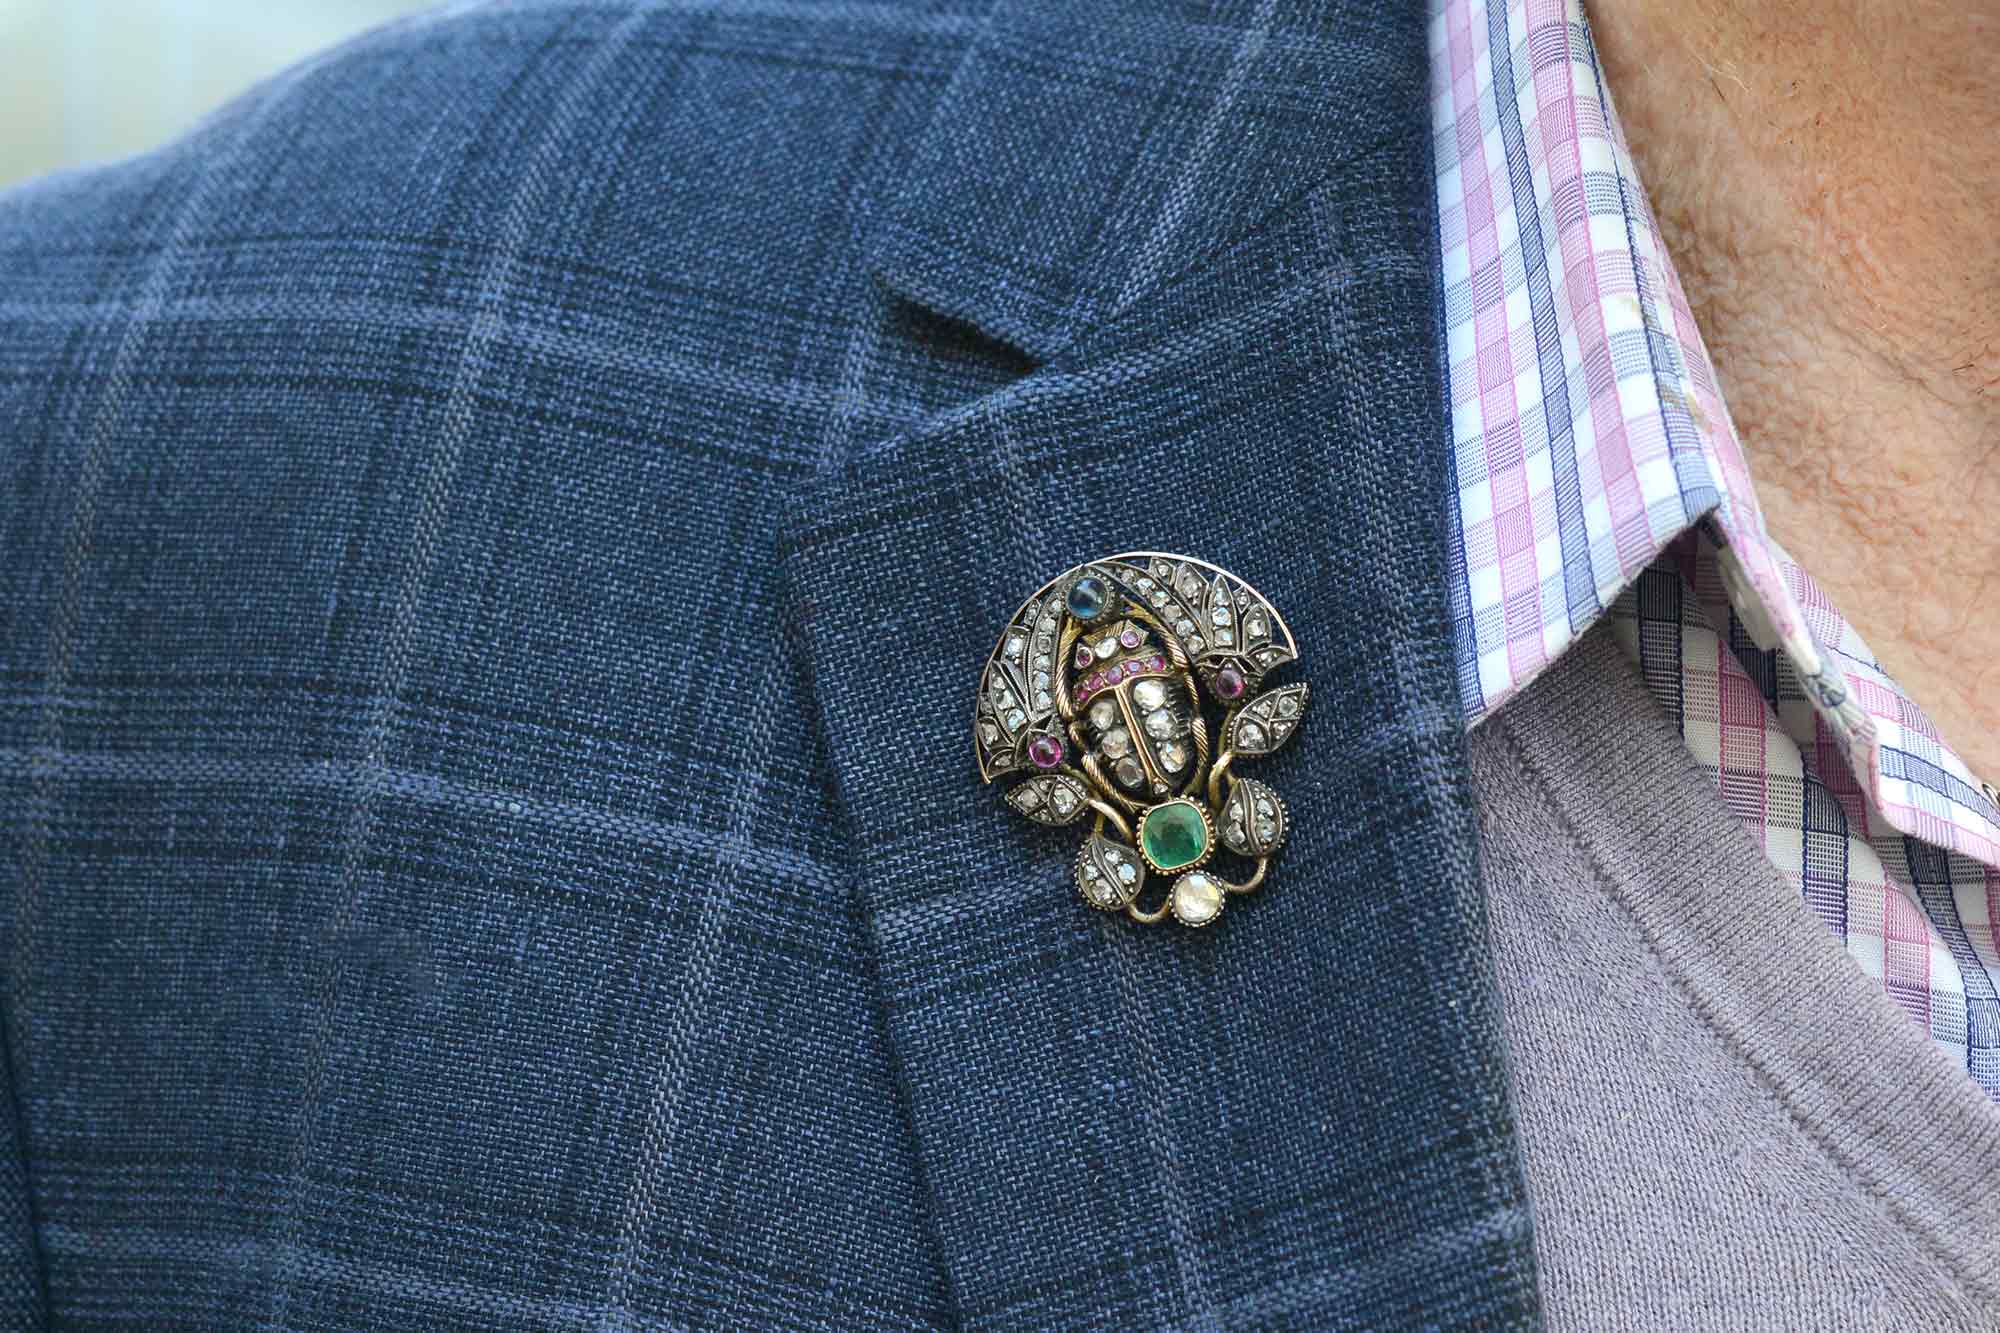 This old scarab brooch is lined with diamonds, rubies, emerald and sapphire.